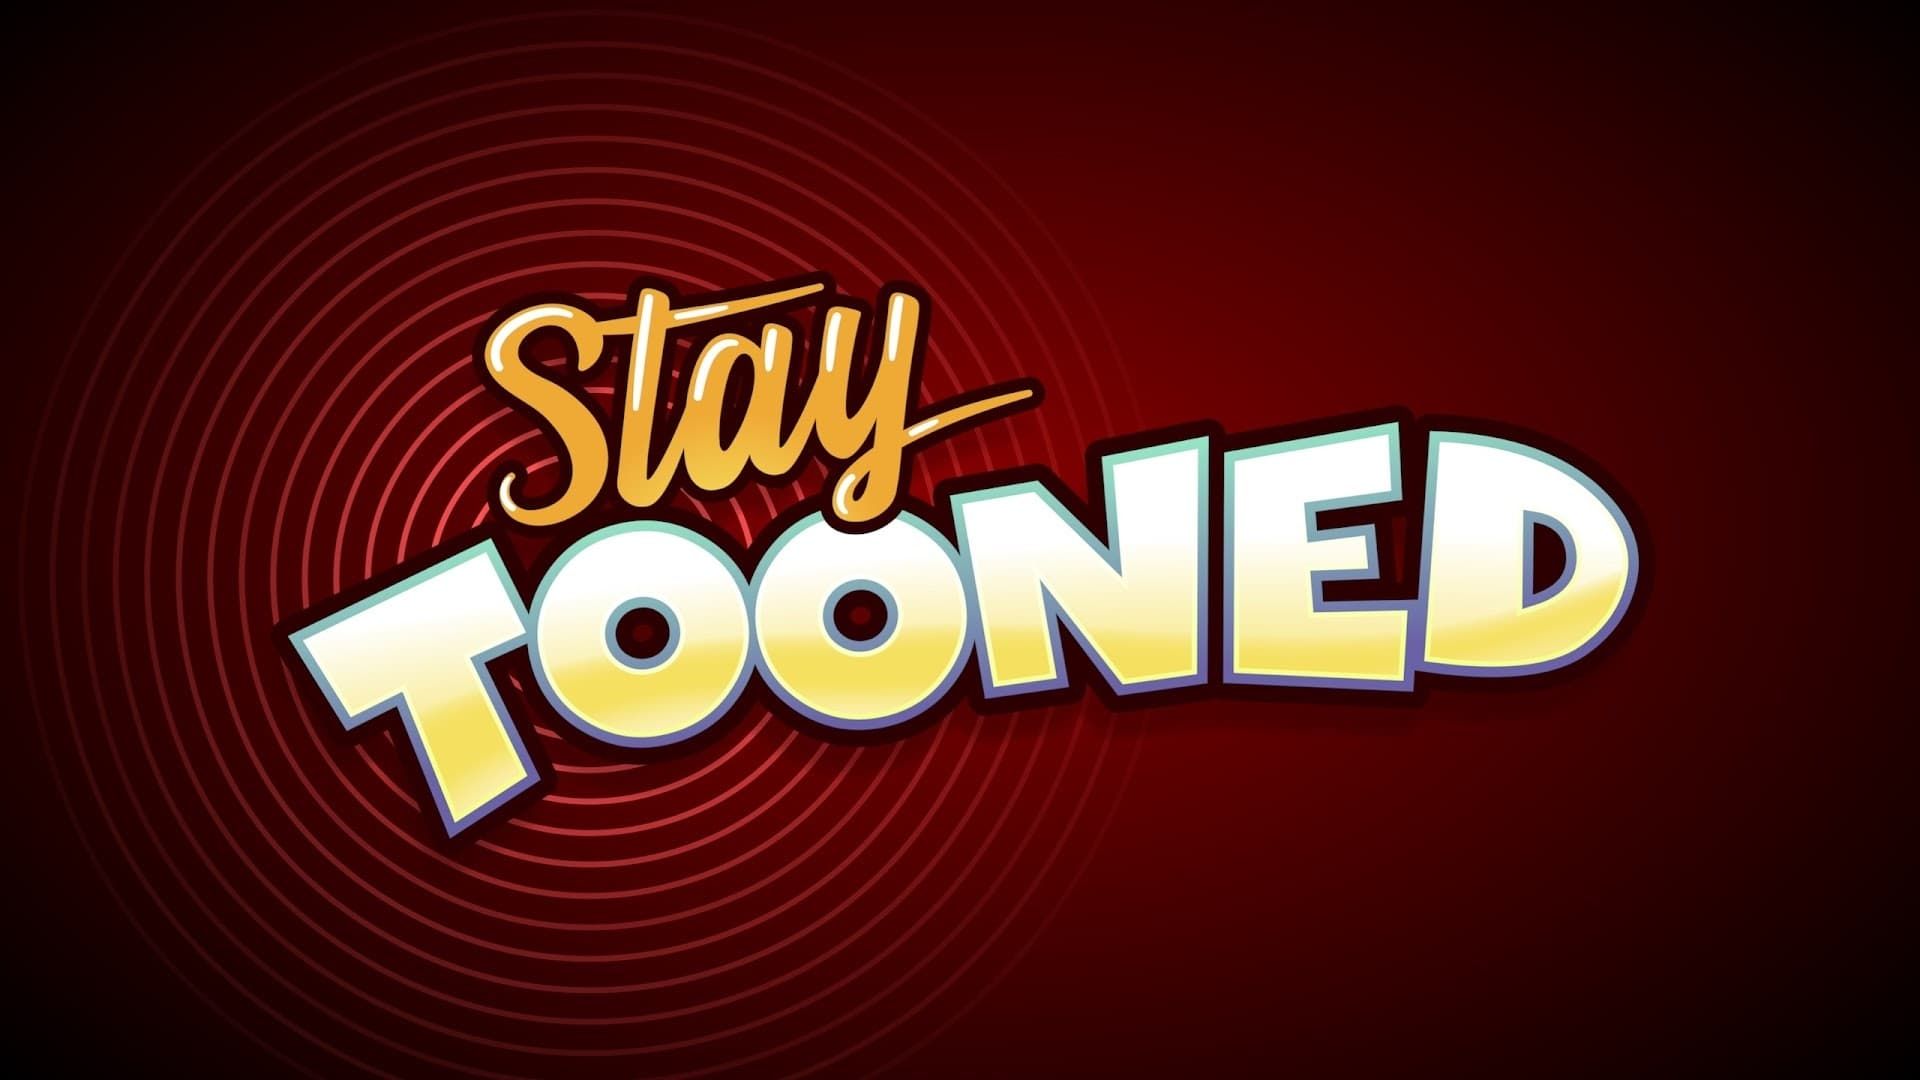 Stay Tooned background